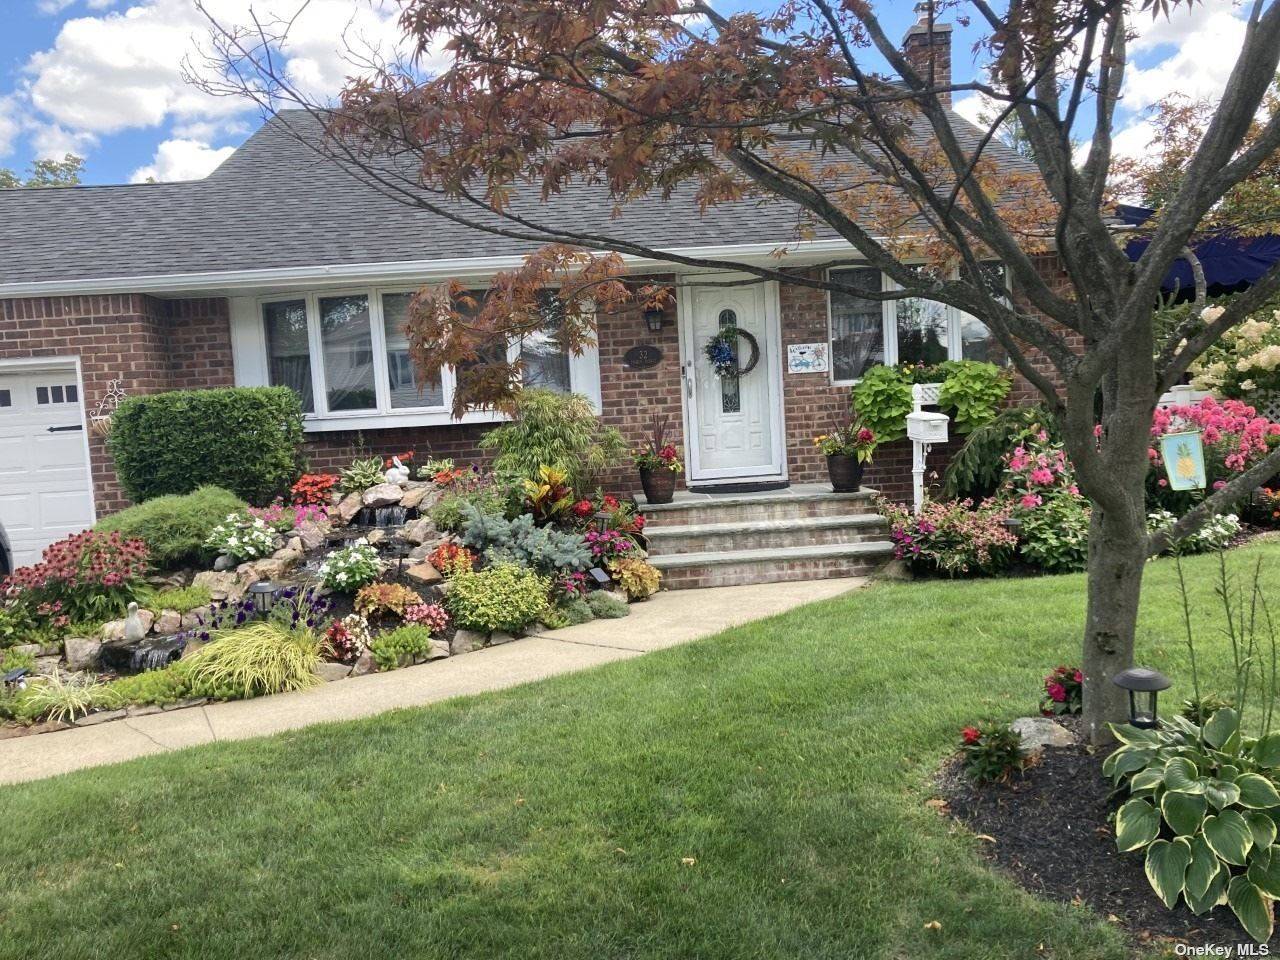 THIS HOME WELCOMES YOU TO A PROFESSIONALLY LANDSCAPED PARK LIKE PROPERTY.